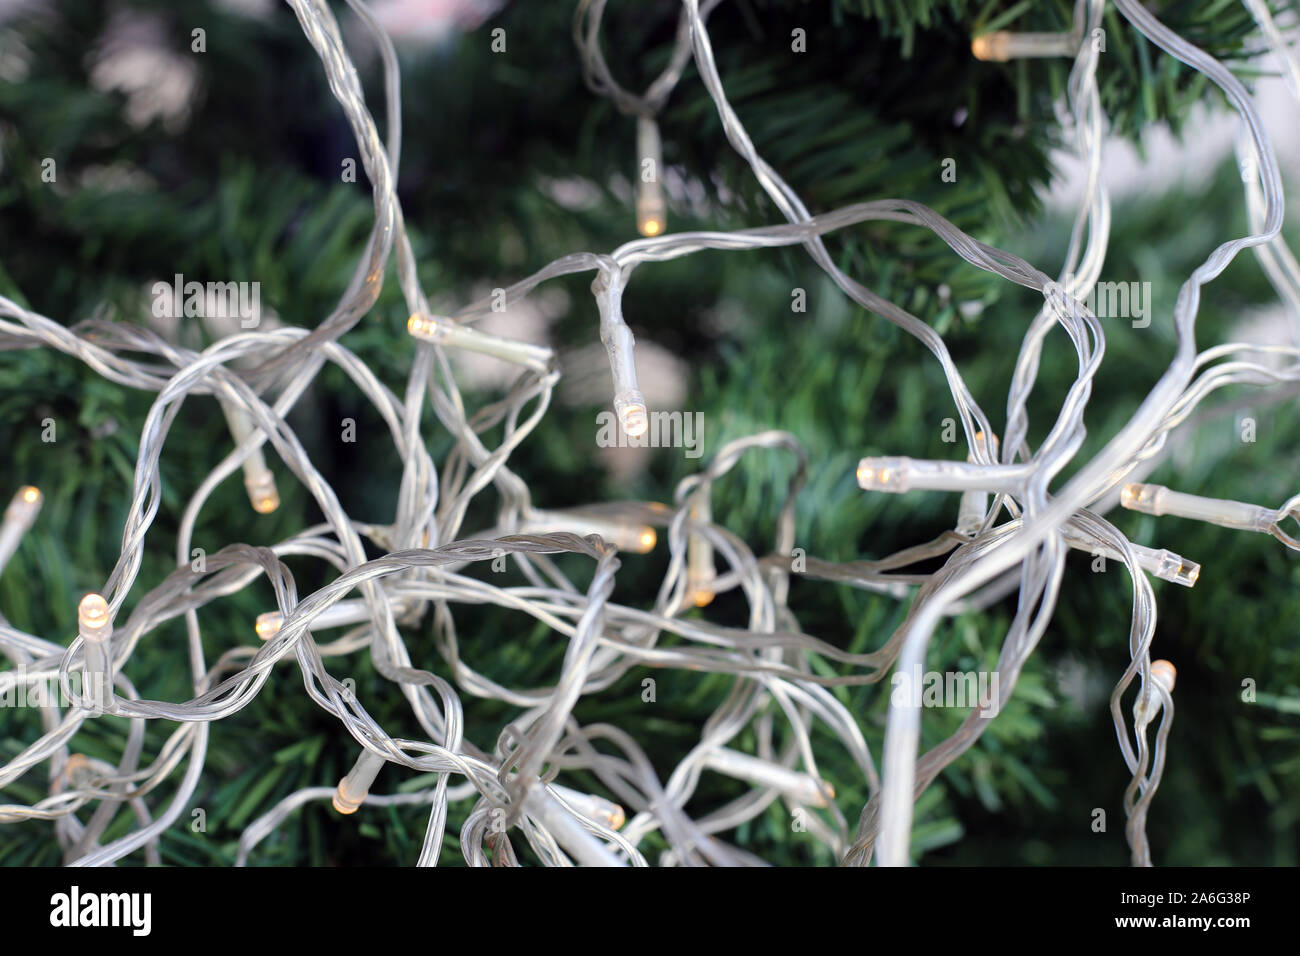 Christmas light strings on the Christmas tree. The string is transparent and the lights are small, light yellow led bulbs. Energy efficient! Stock Photo